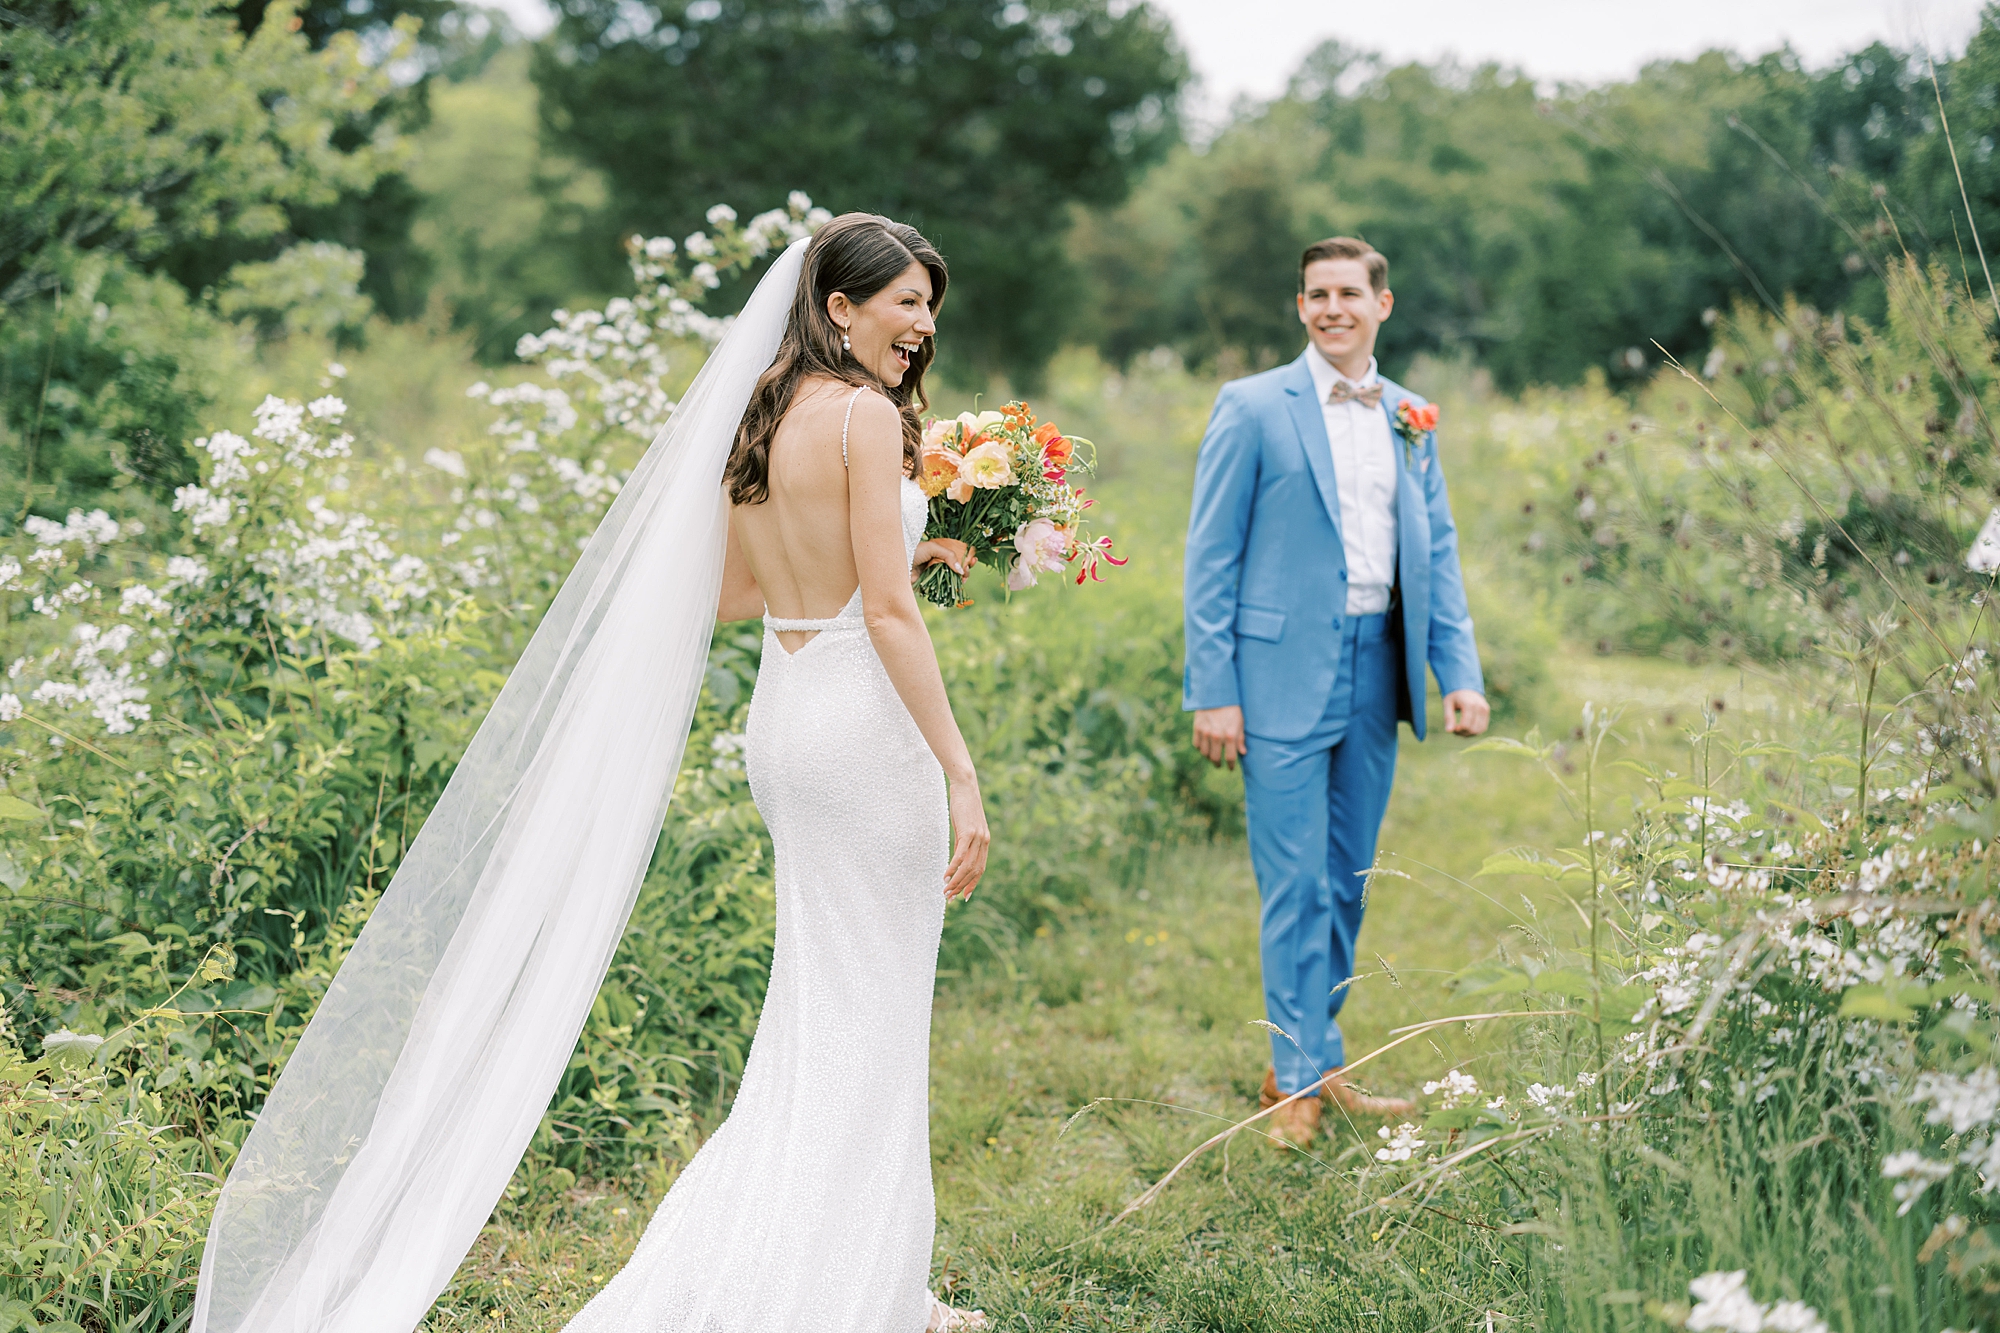 groom turns to look at bride in gardens at Bowman's Hill Wildflower Preserve wedding